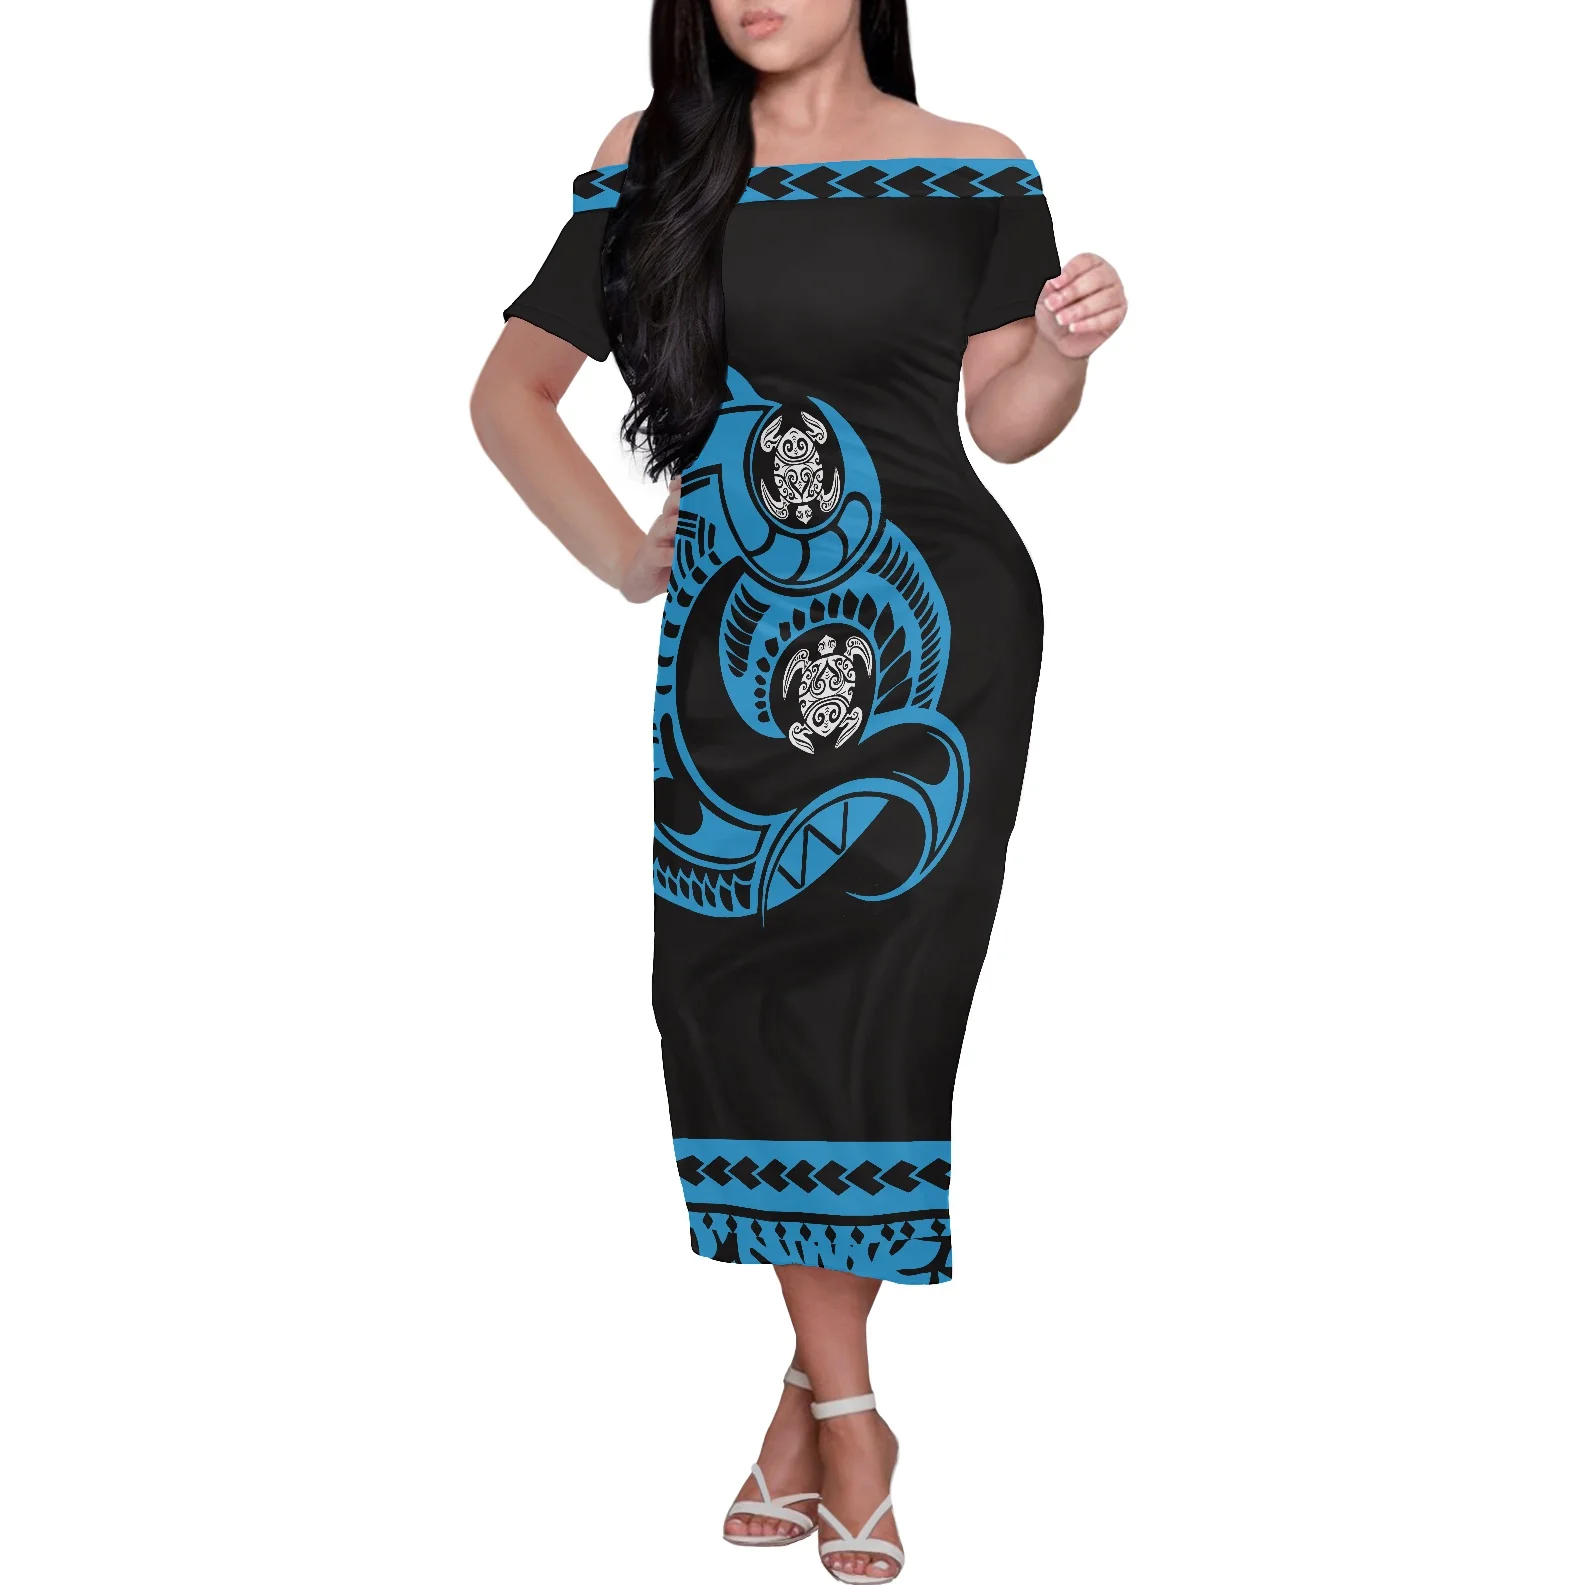 

Samoa Hawaii Tribal Sea turtle Printing Floral Sexy Dress Women Summer Casual Short Sleeve Off Shoulder Plus Size Party Dresses